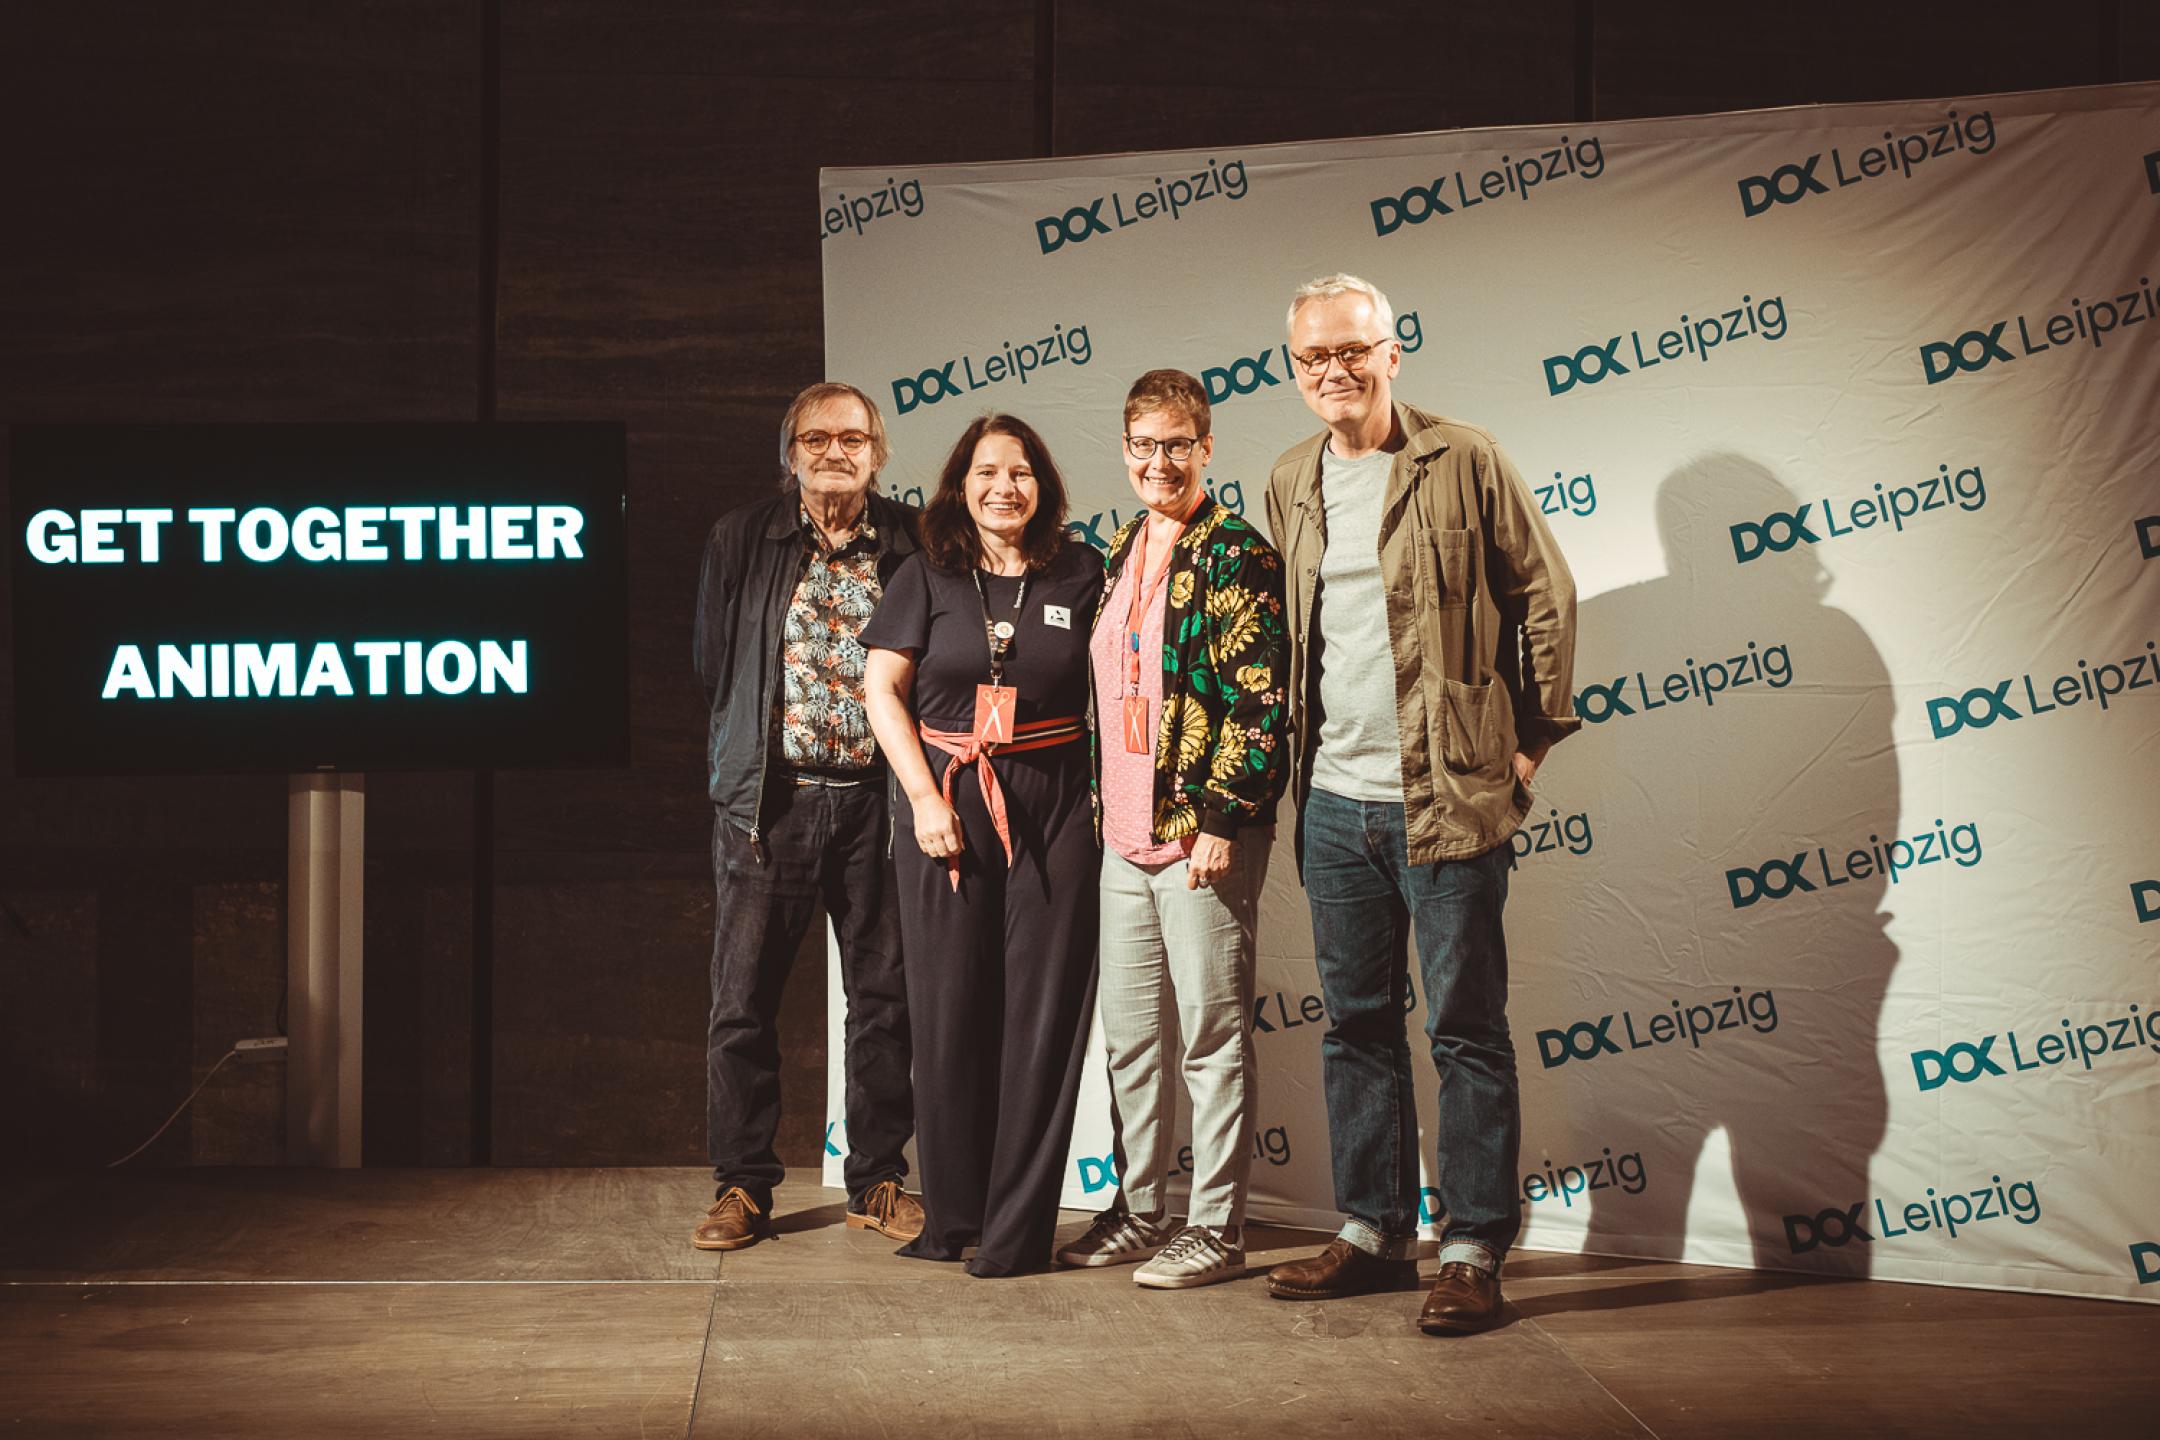 Four persons pose together in front of a DOK Leipzig logo banner.